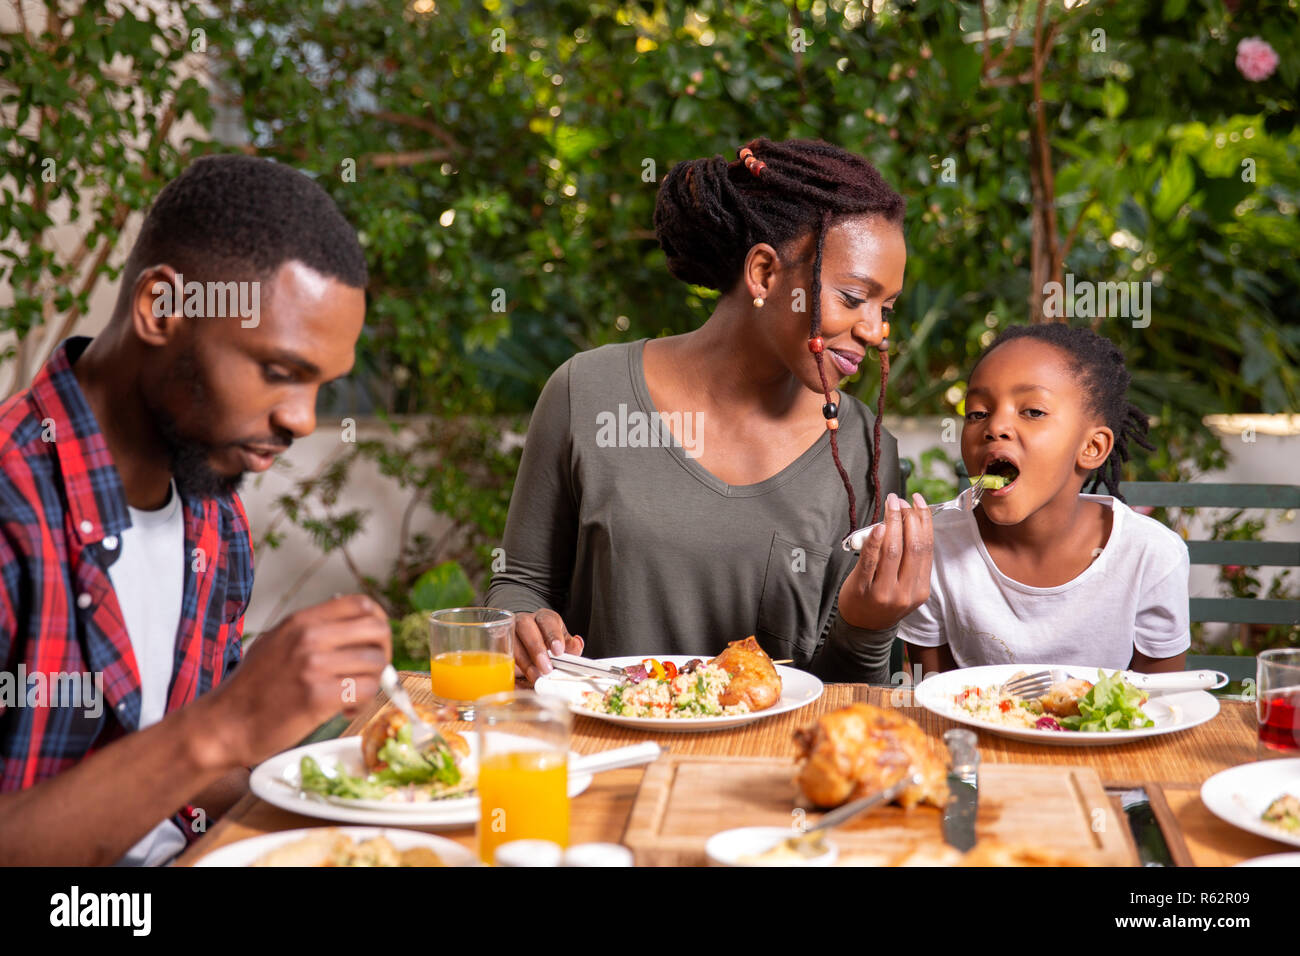 A family eating lunch together Stock Photo